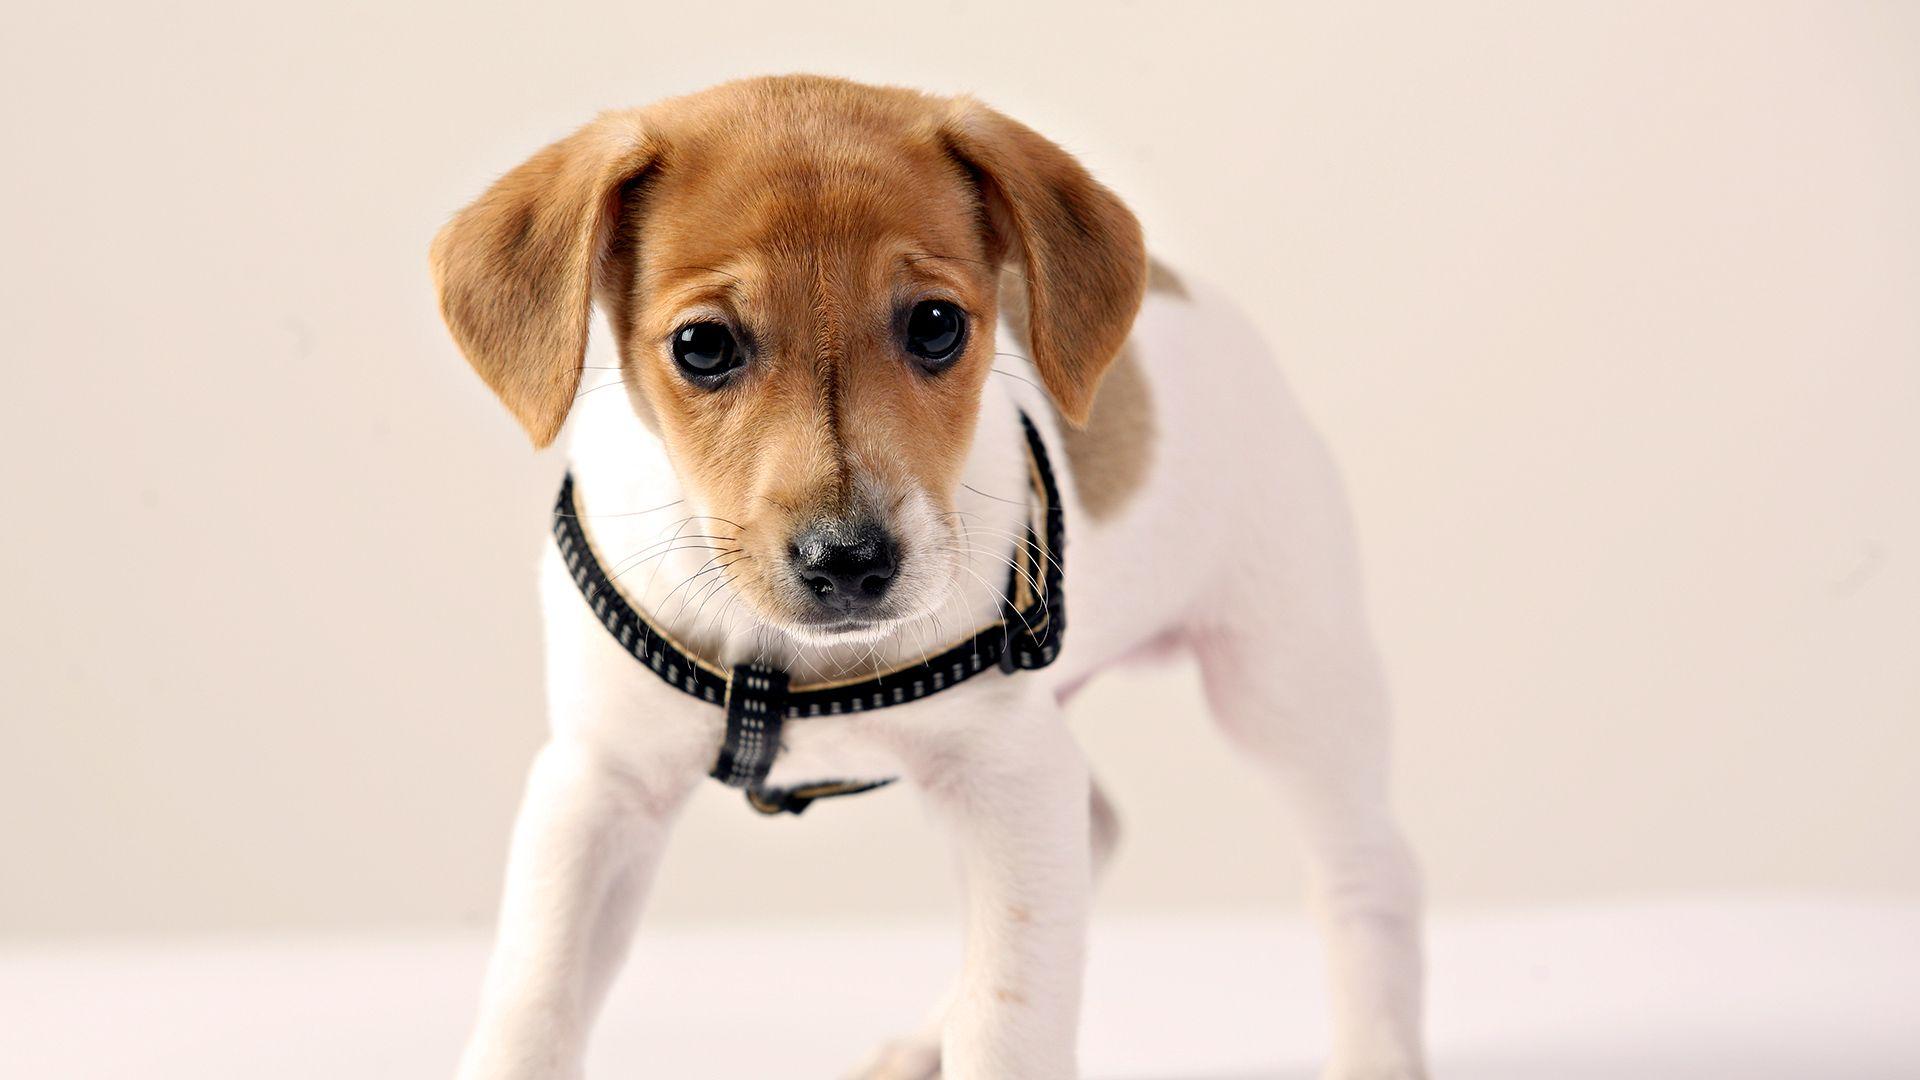 Puppy Jack Russell terrier Dogs Animals 1920x1080